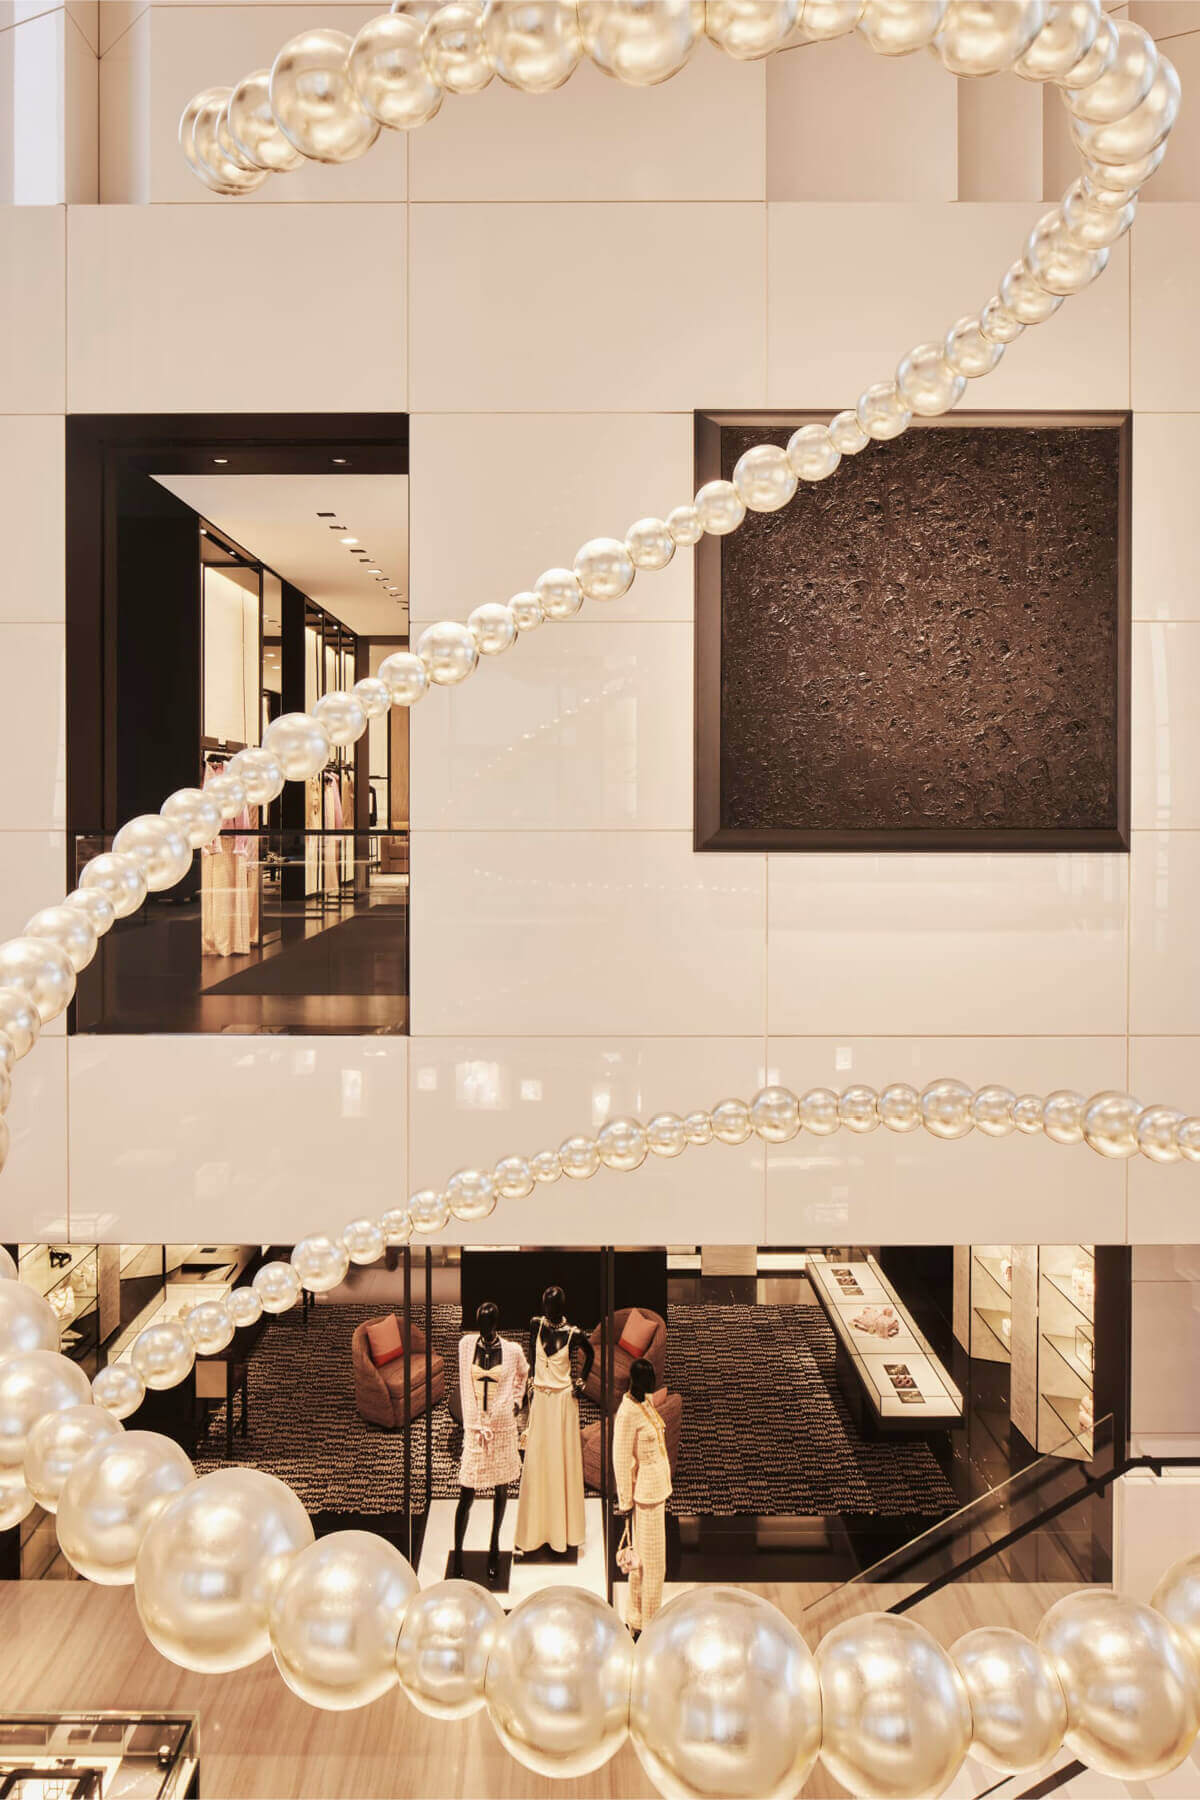 Louis Vuitton's Rodeo Drive renovation a mix of classic and cool